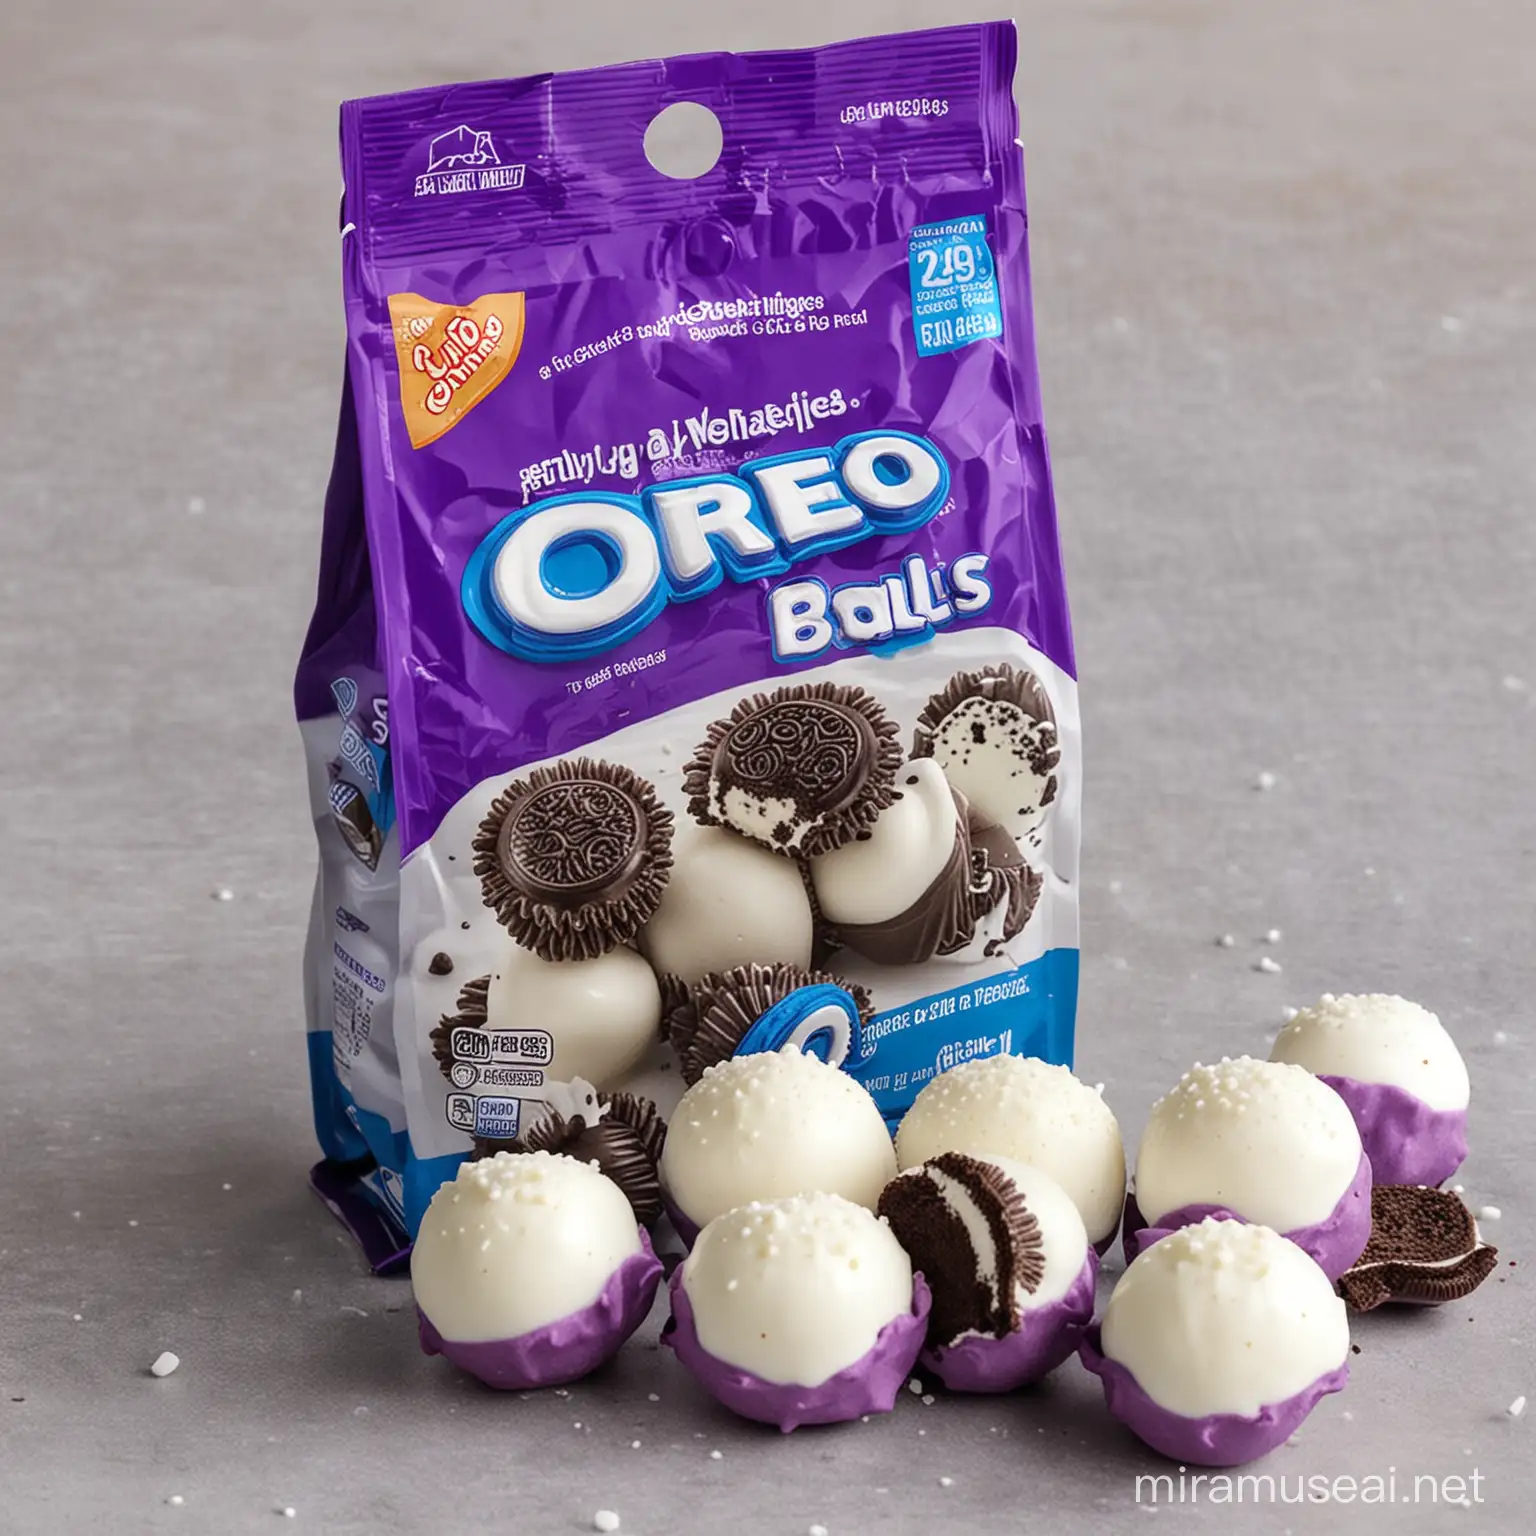 a bag of oreo balls, nice packaging with colors purple and white